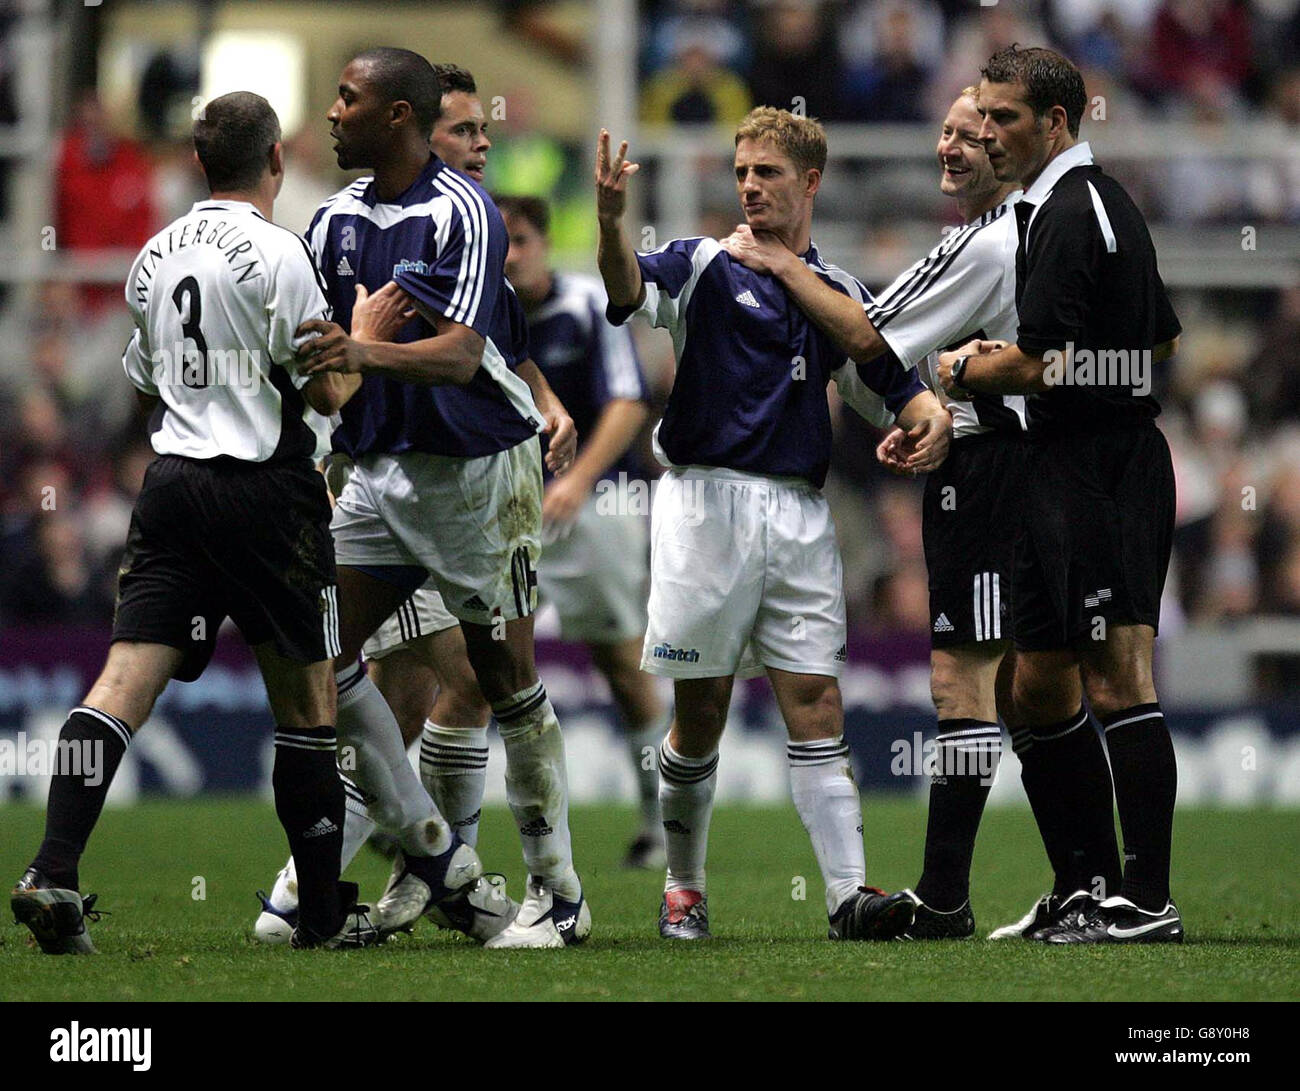 Things get heated as the players square up during The Match at St James Park, Sunday October 10, 2005. PRESS ASSOCIATION Photo. Photo credit should read: Owen Humphreys/PA Stock Photo